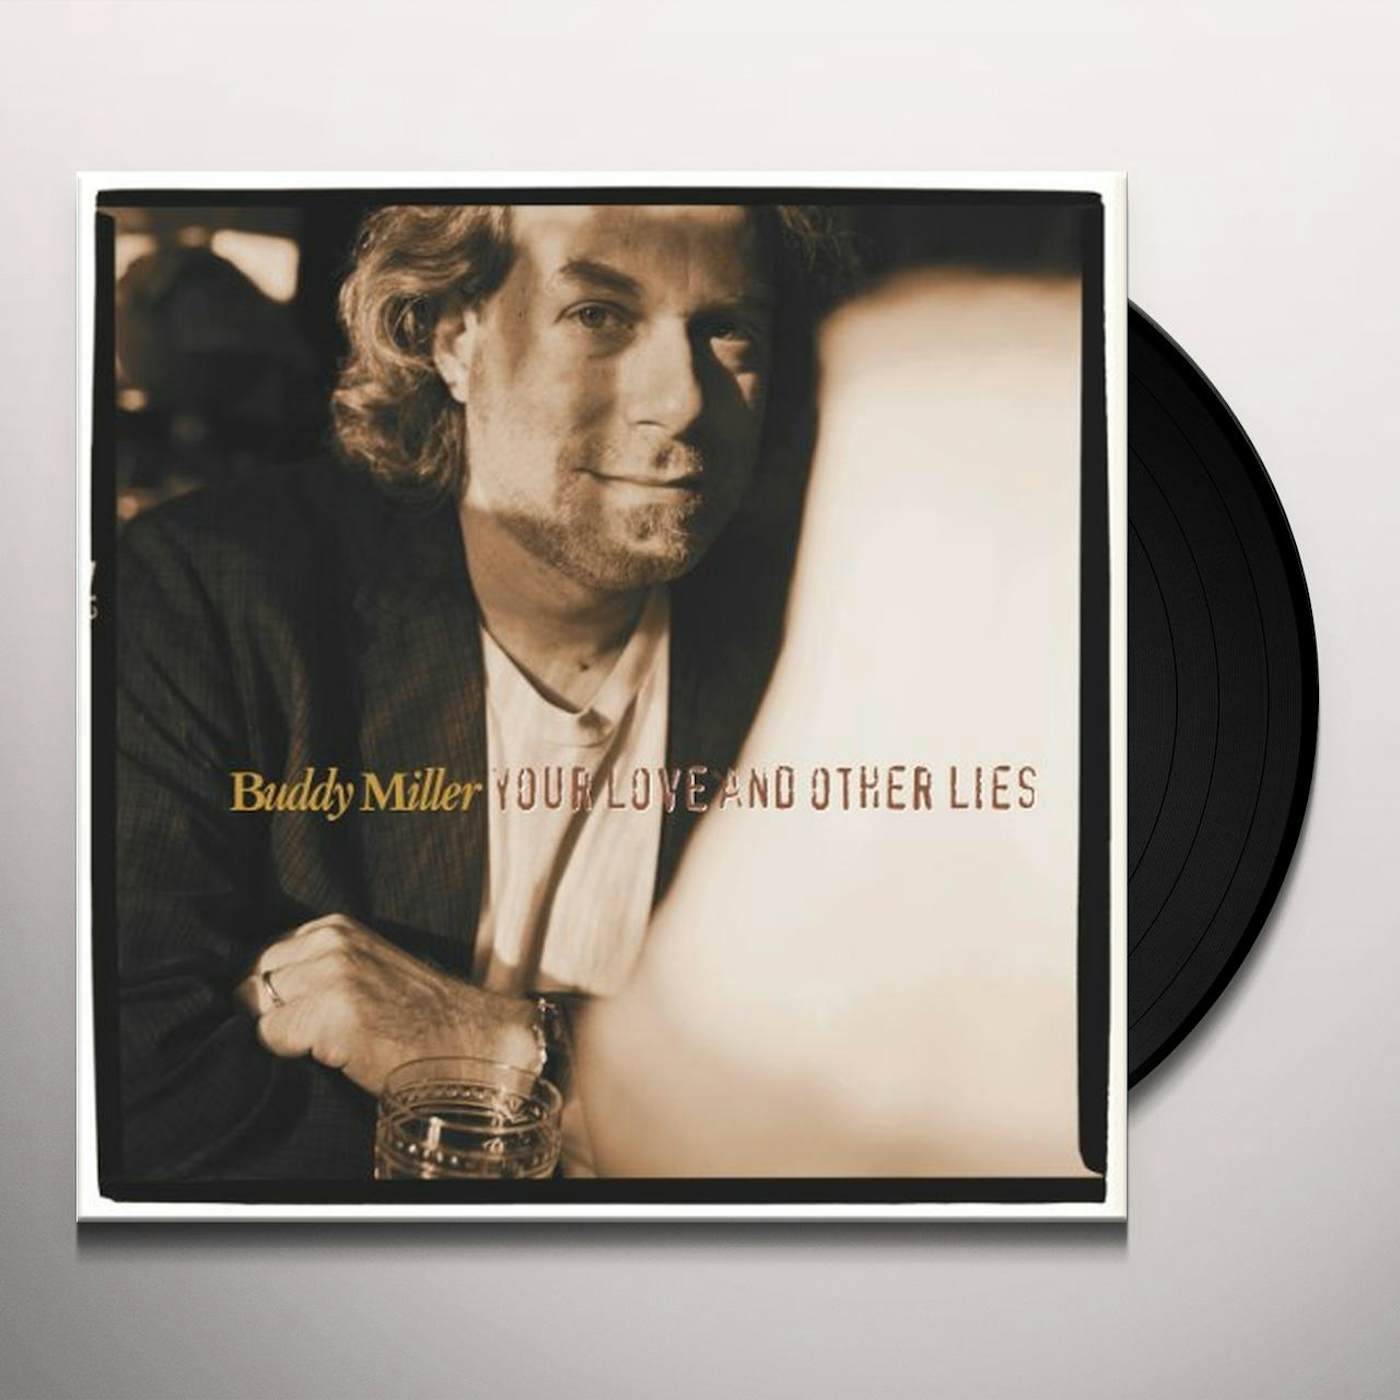 Buddy Miller Your Love and Other Lies Vinyl Record